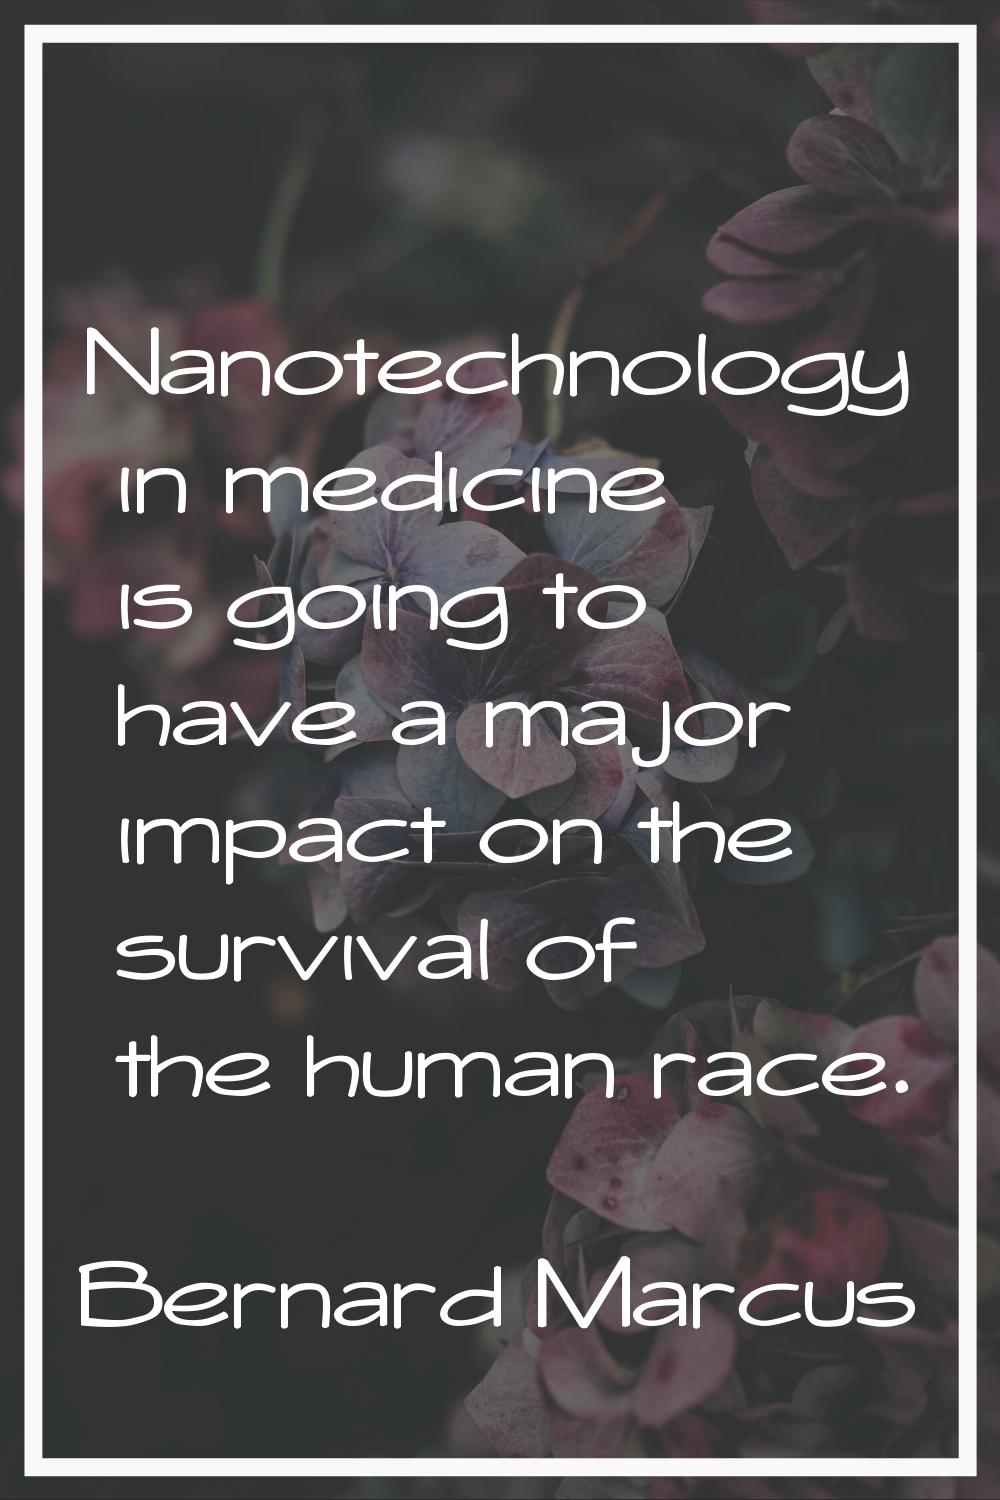 Nanotechnology in medicine is going to have a major impact on the survival of the human race.